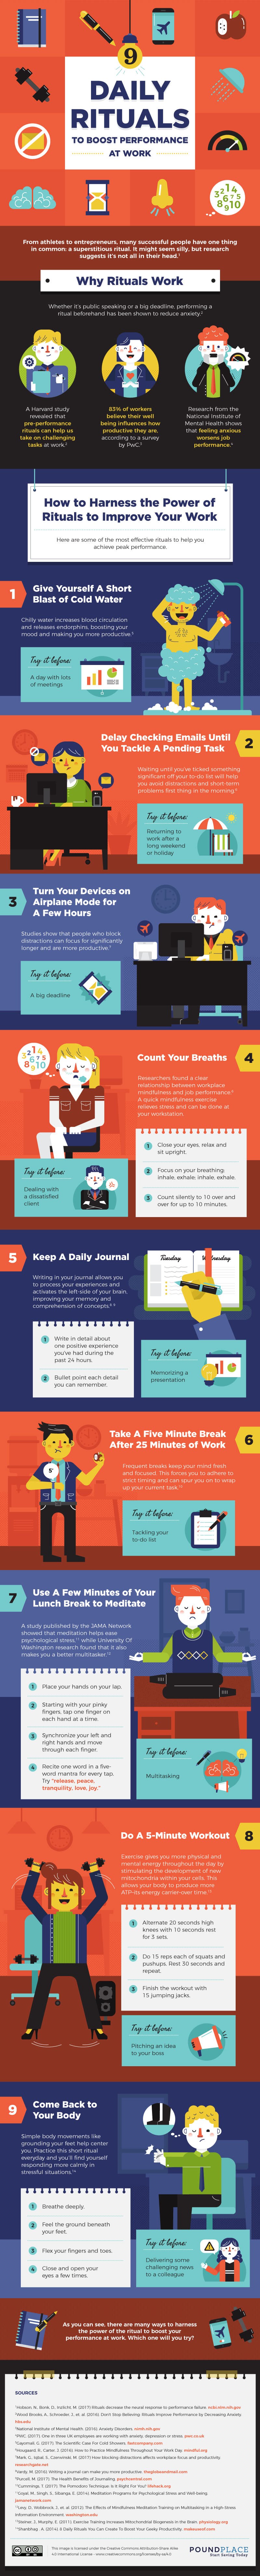 9 Daily Rituals To Boost Performance At Work - #infographic